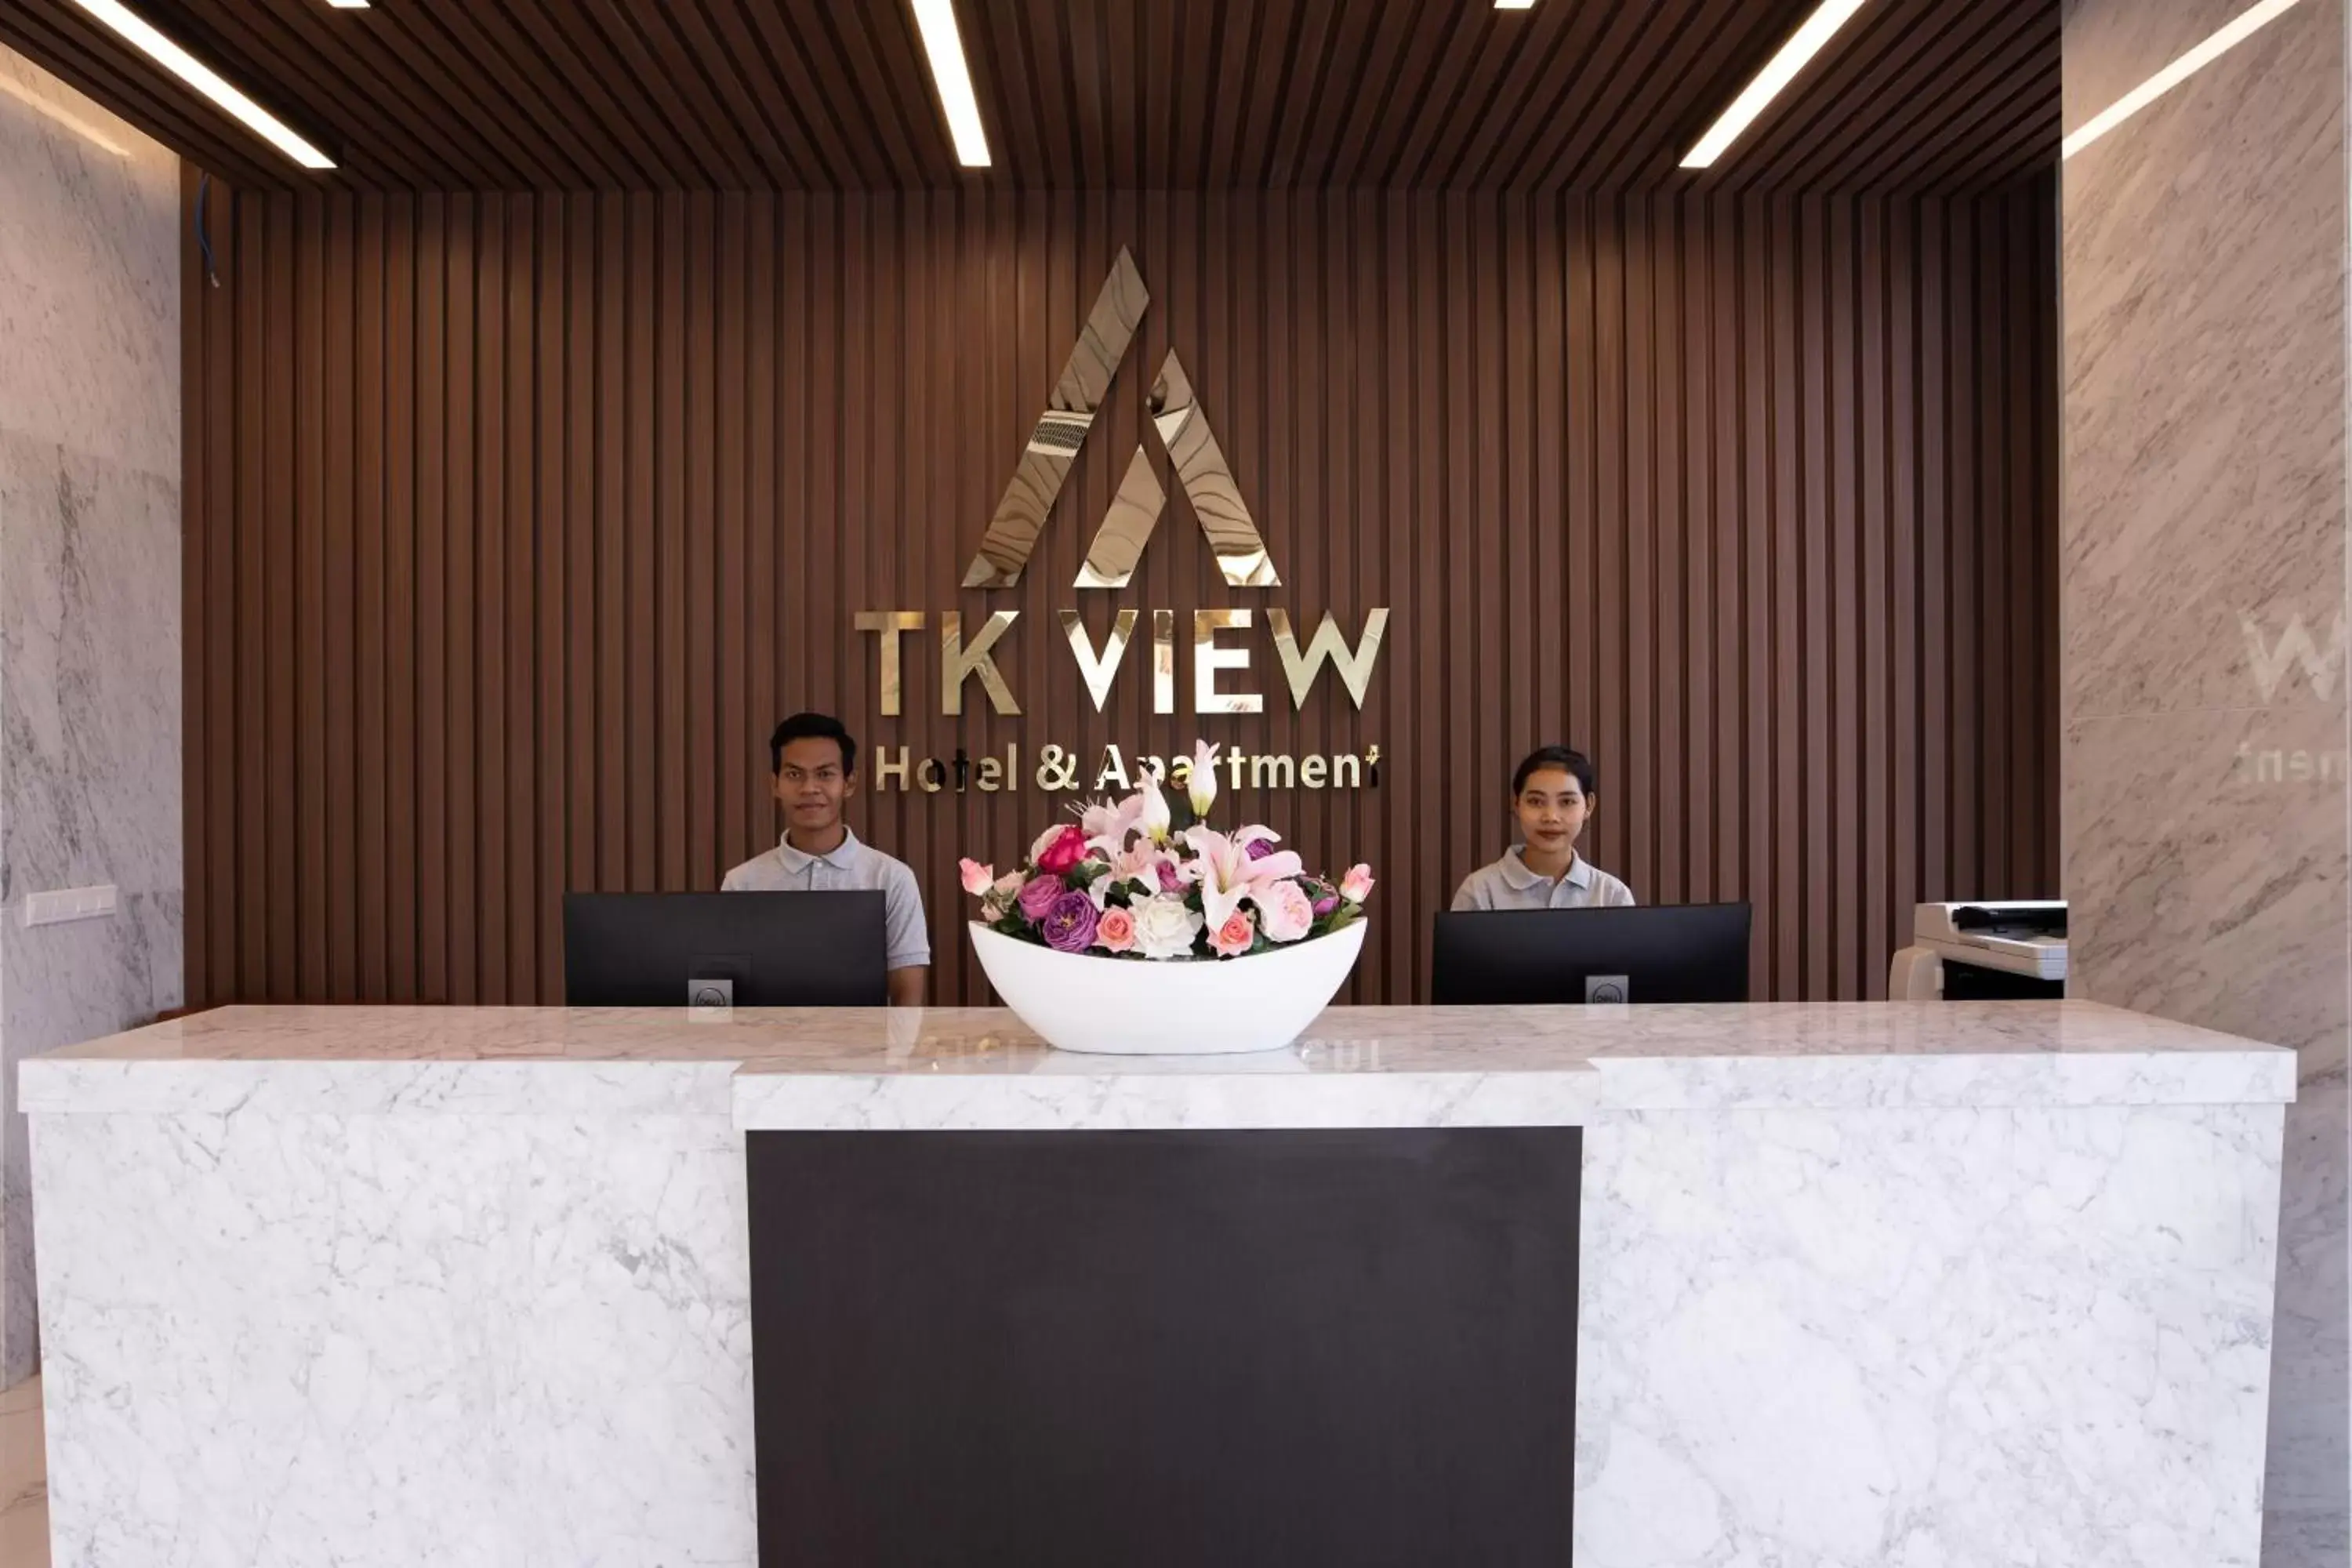 Staff in TK VIEW HOTEL & APARTMENT